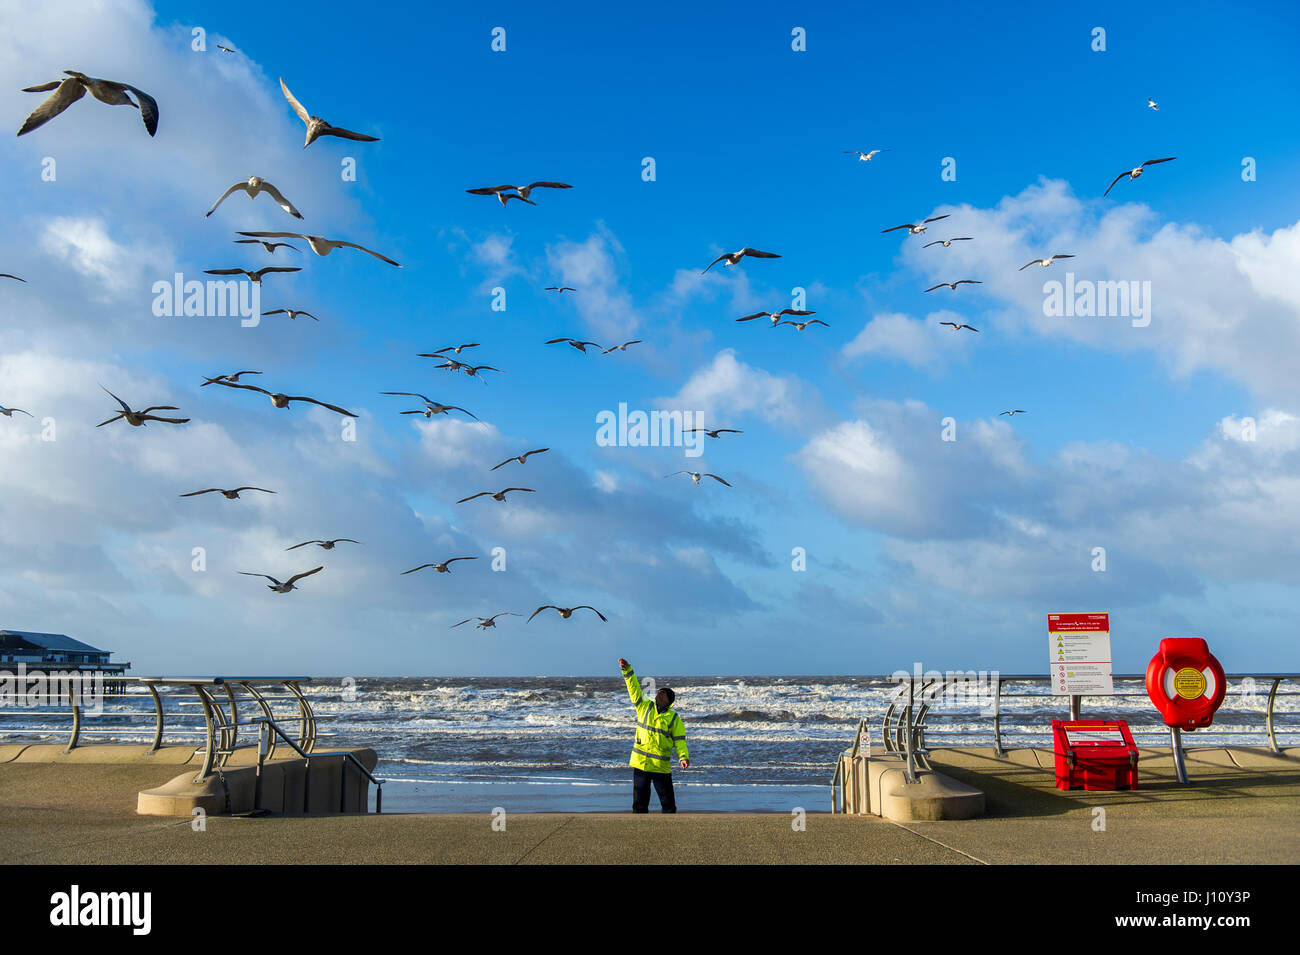 Seagulls in Blackpool, United Kingdom being fed by a man in a hi-vis jacket with a blue sky and copy space. Stock Photo